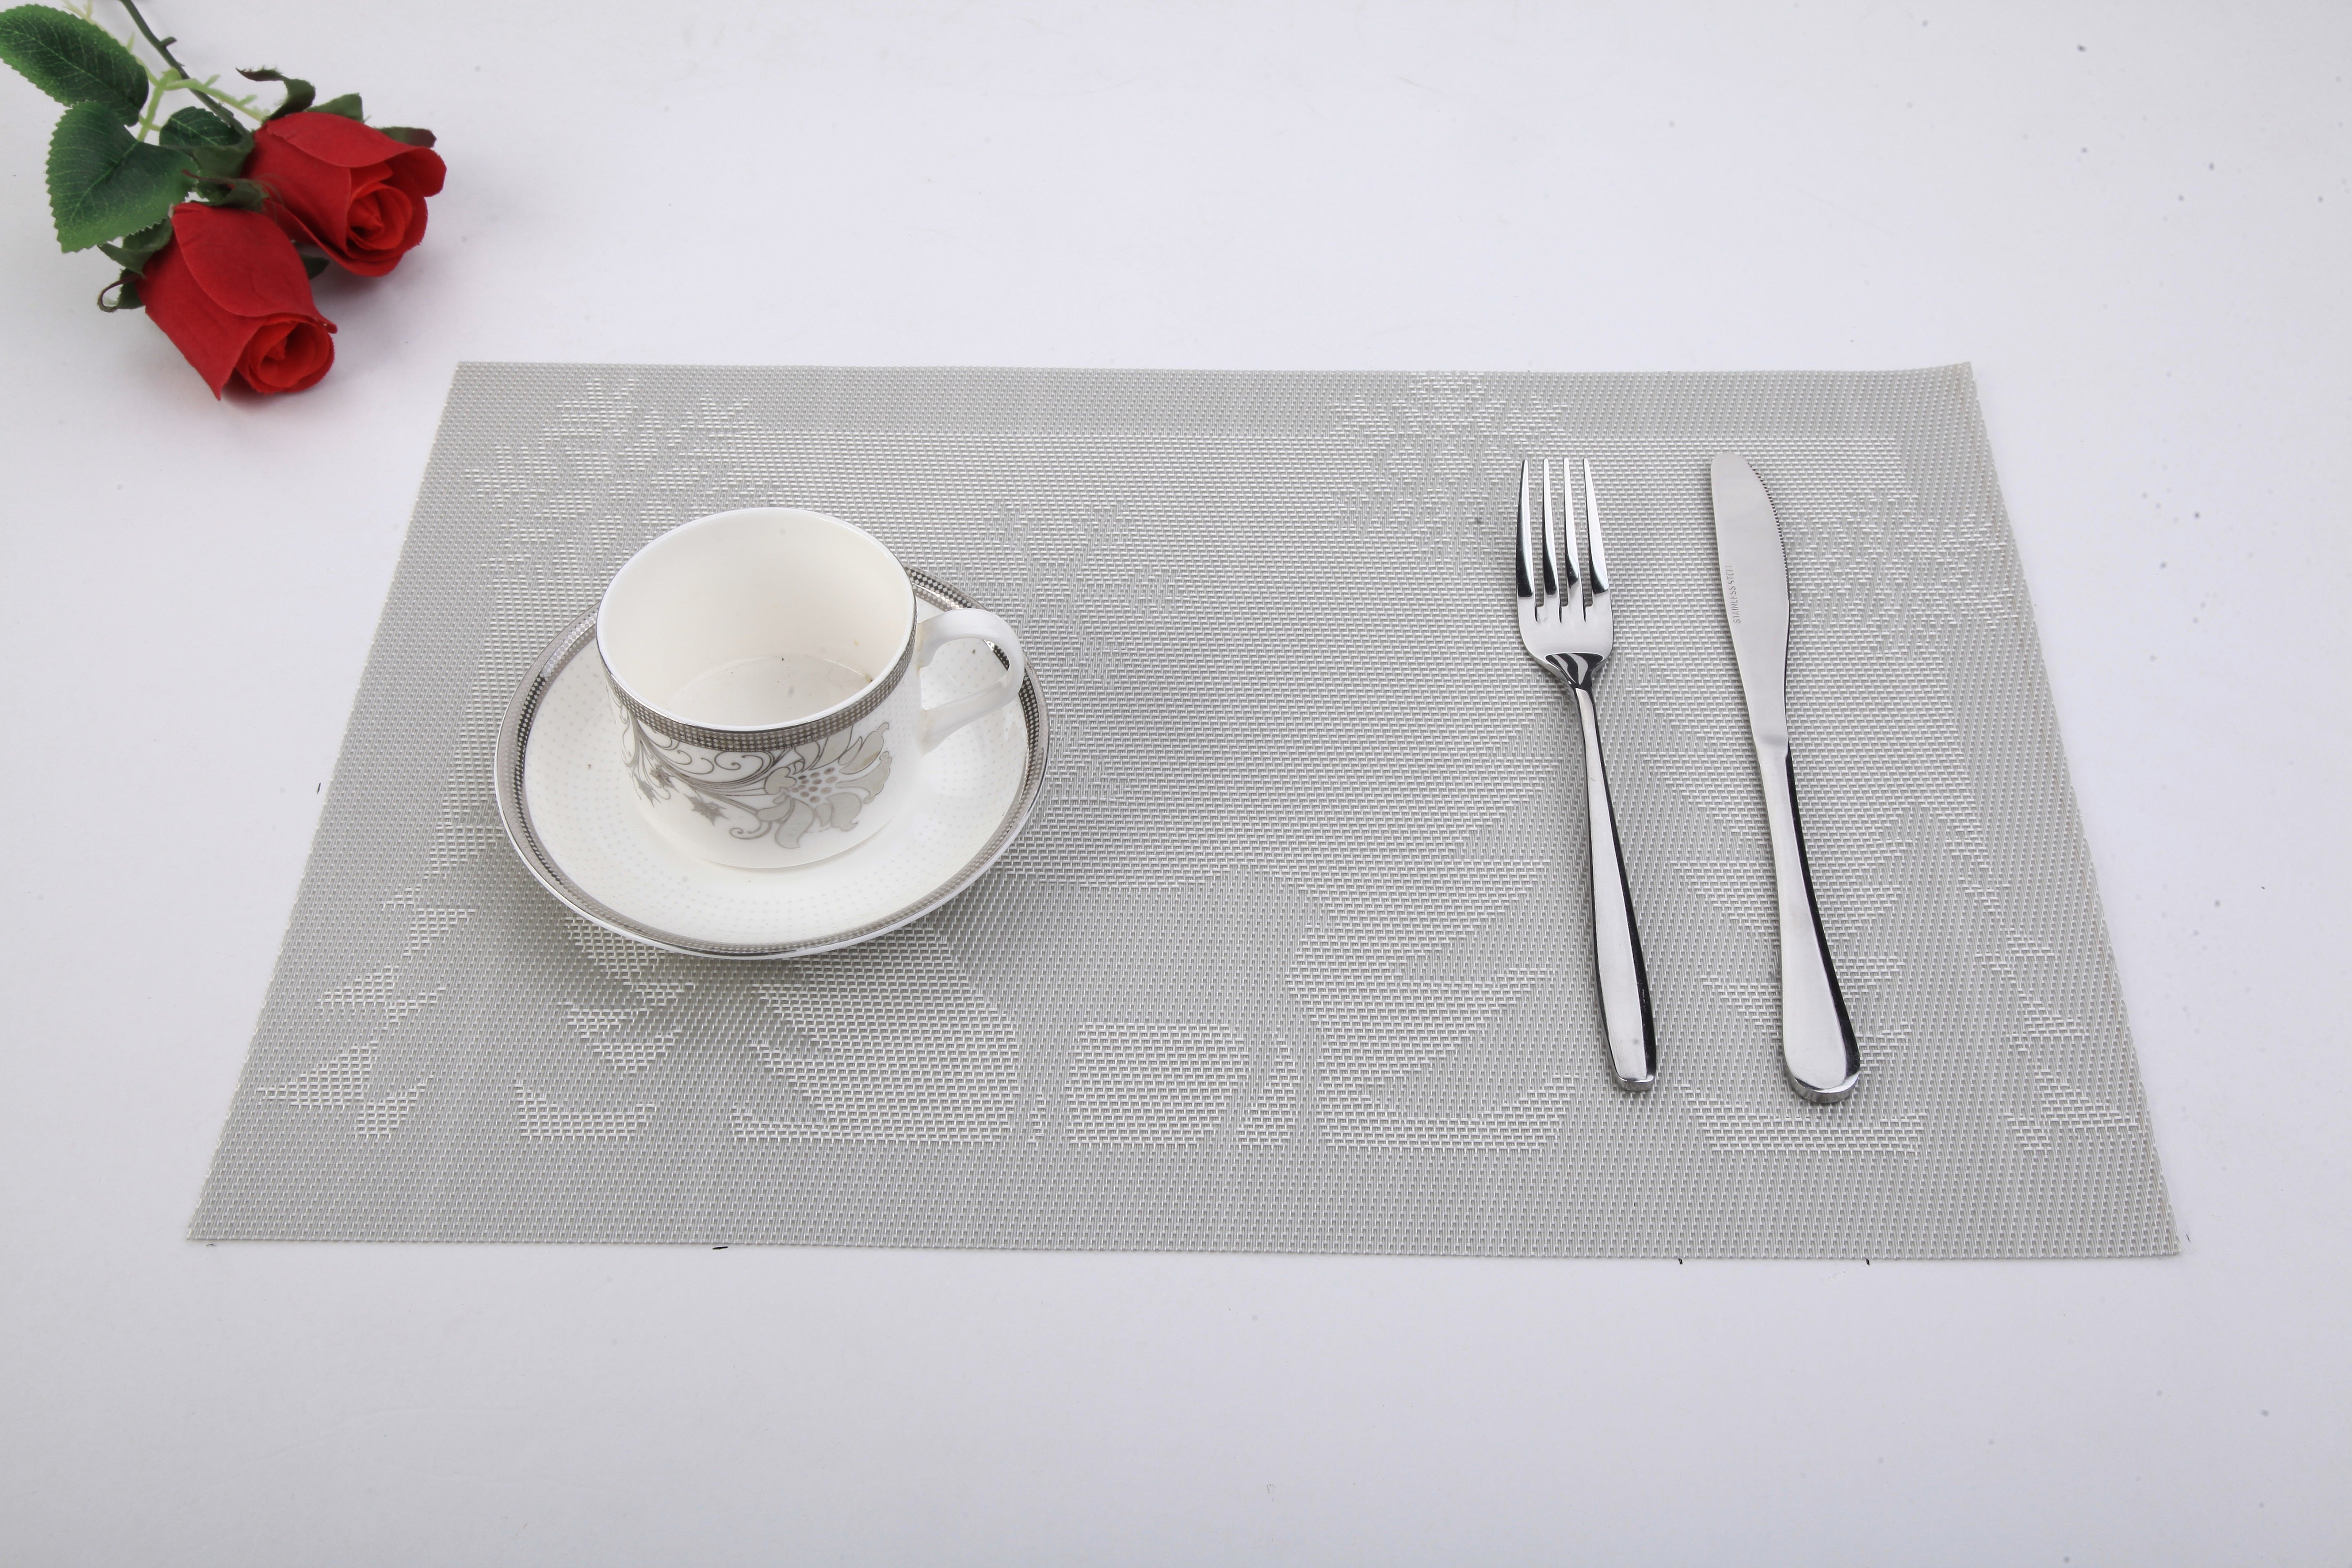 Silver & White Deer Jacquard	12" x 18" In. Woven Non-Slip Washable Placemat Set of 4